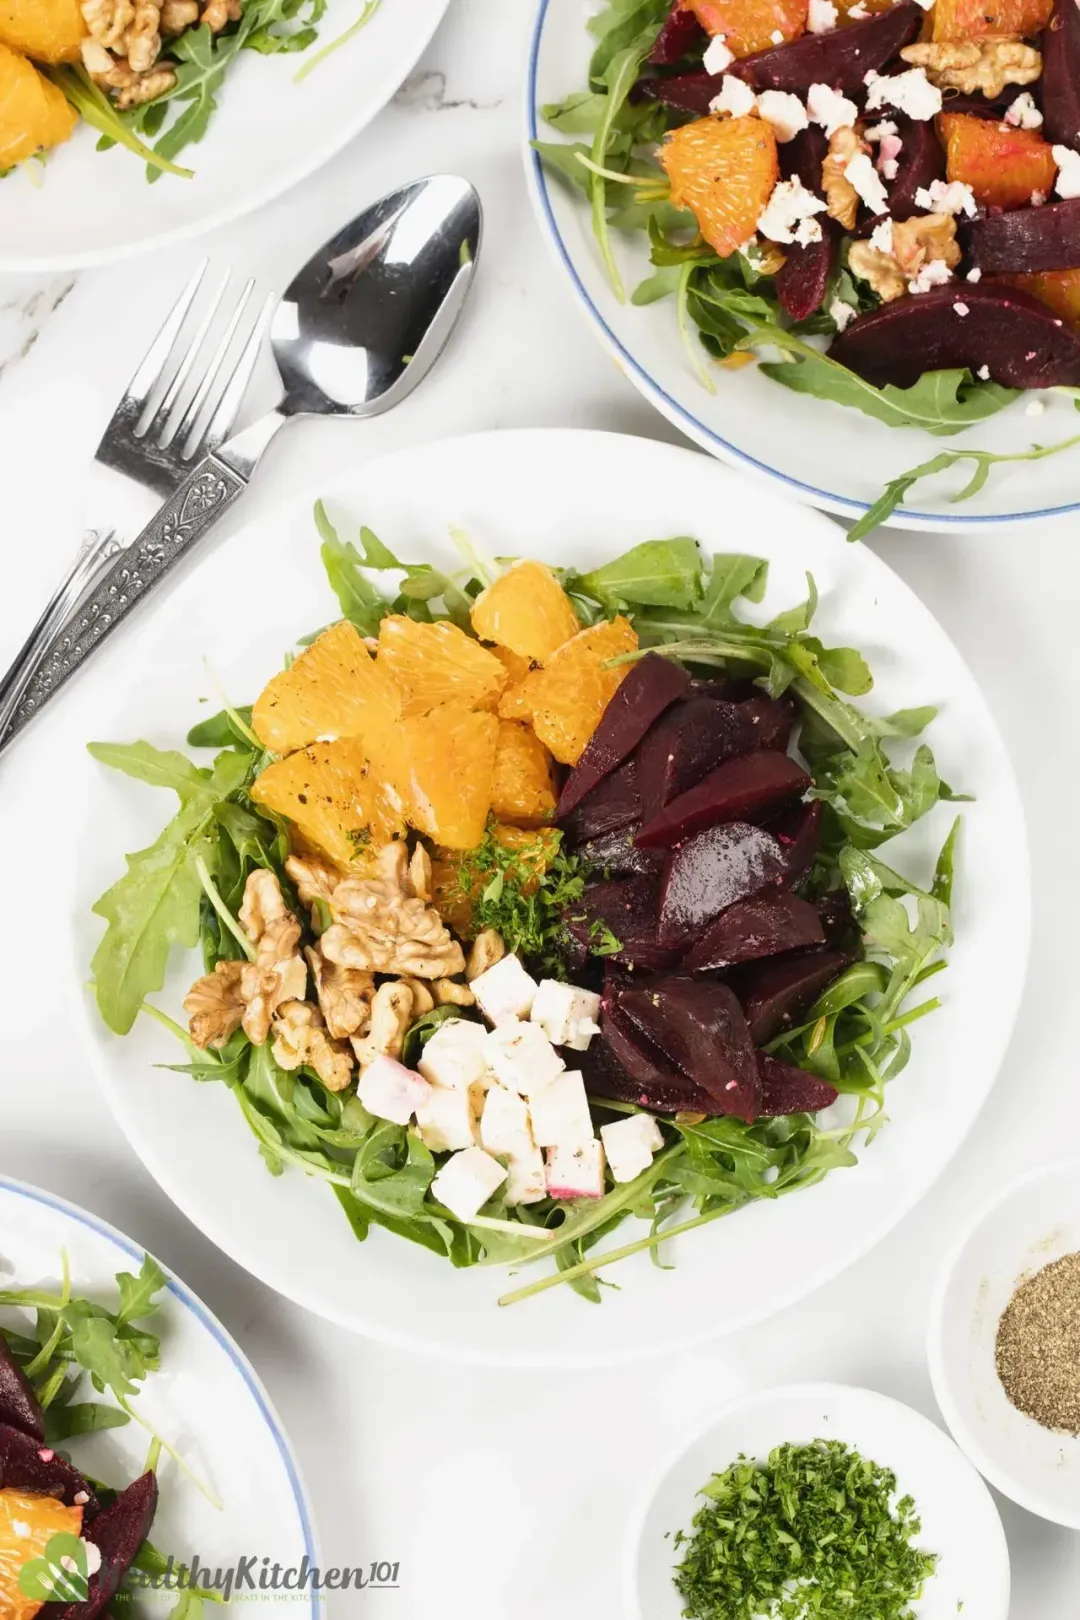 Are Feta Cheese and Beets Good for You